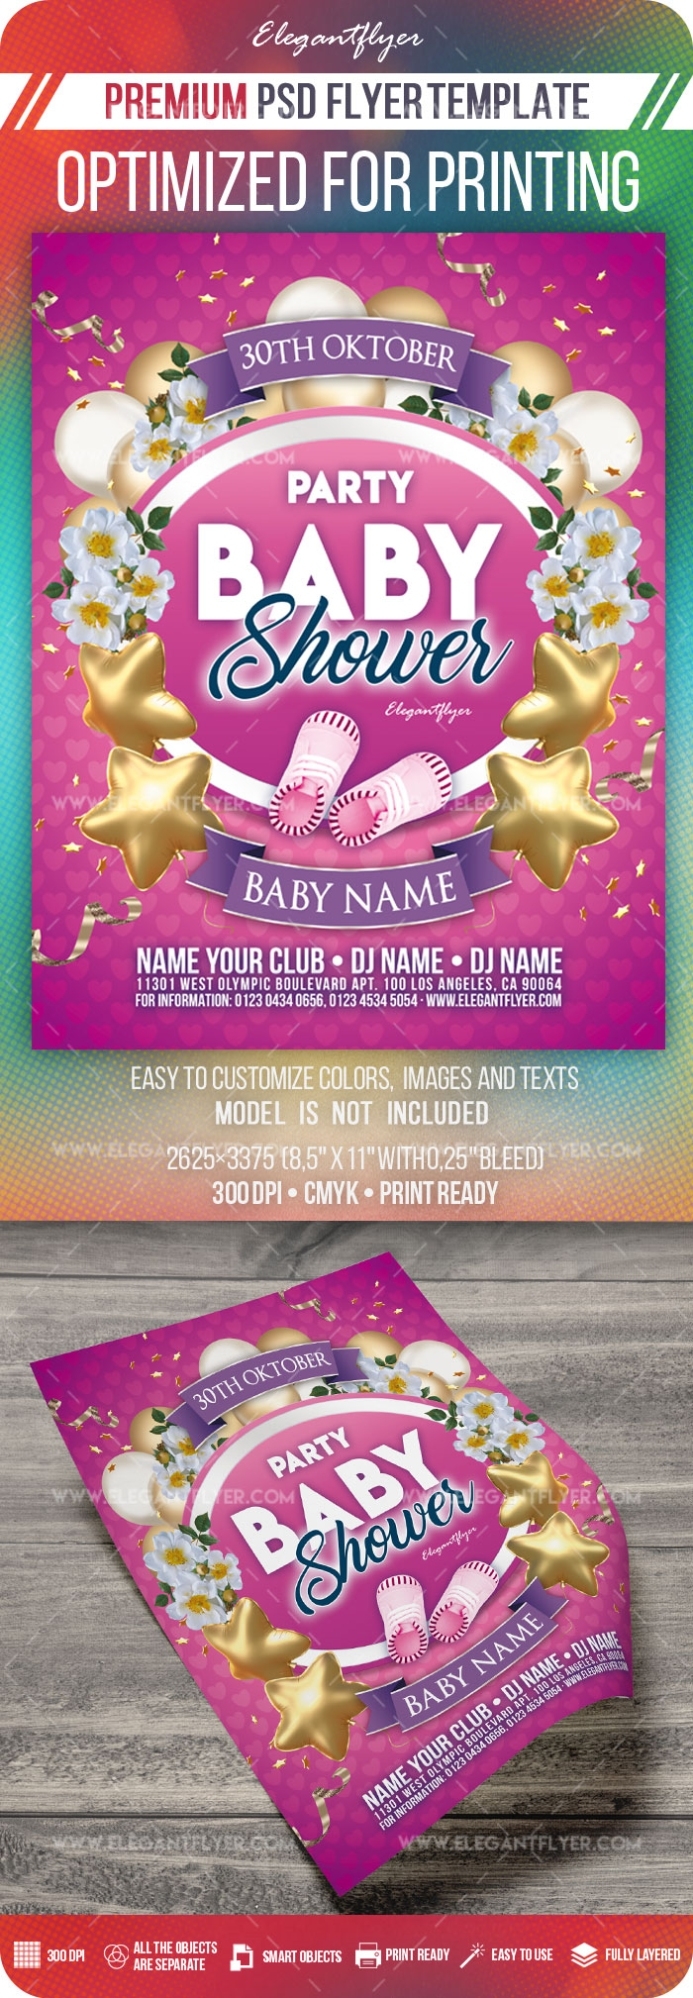 Baby Shower Party - Flyer Psd Template | By Elegantflyer With Baby Shower Flyer Template